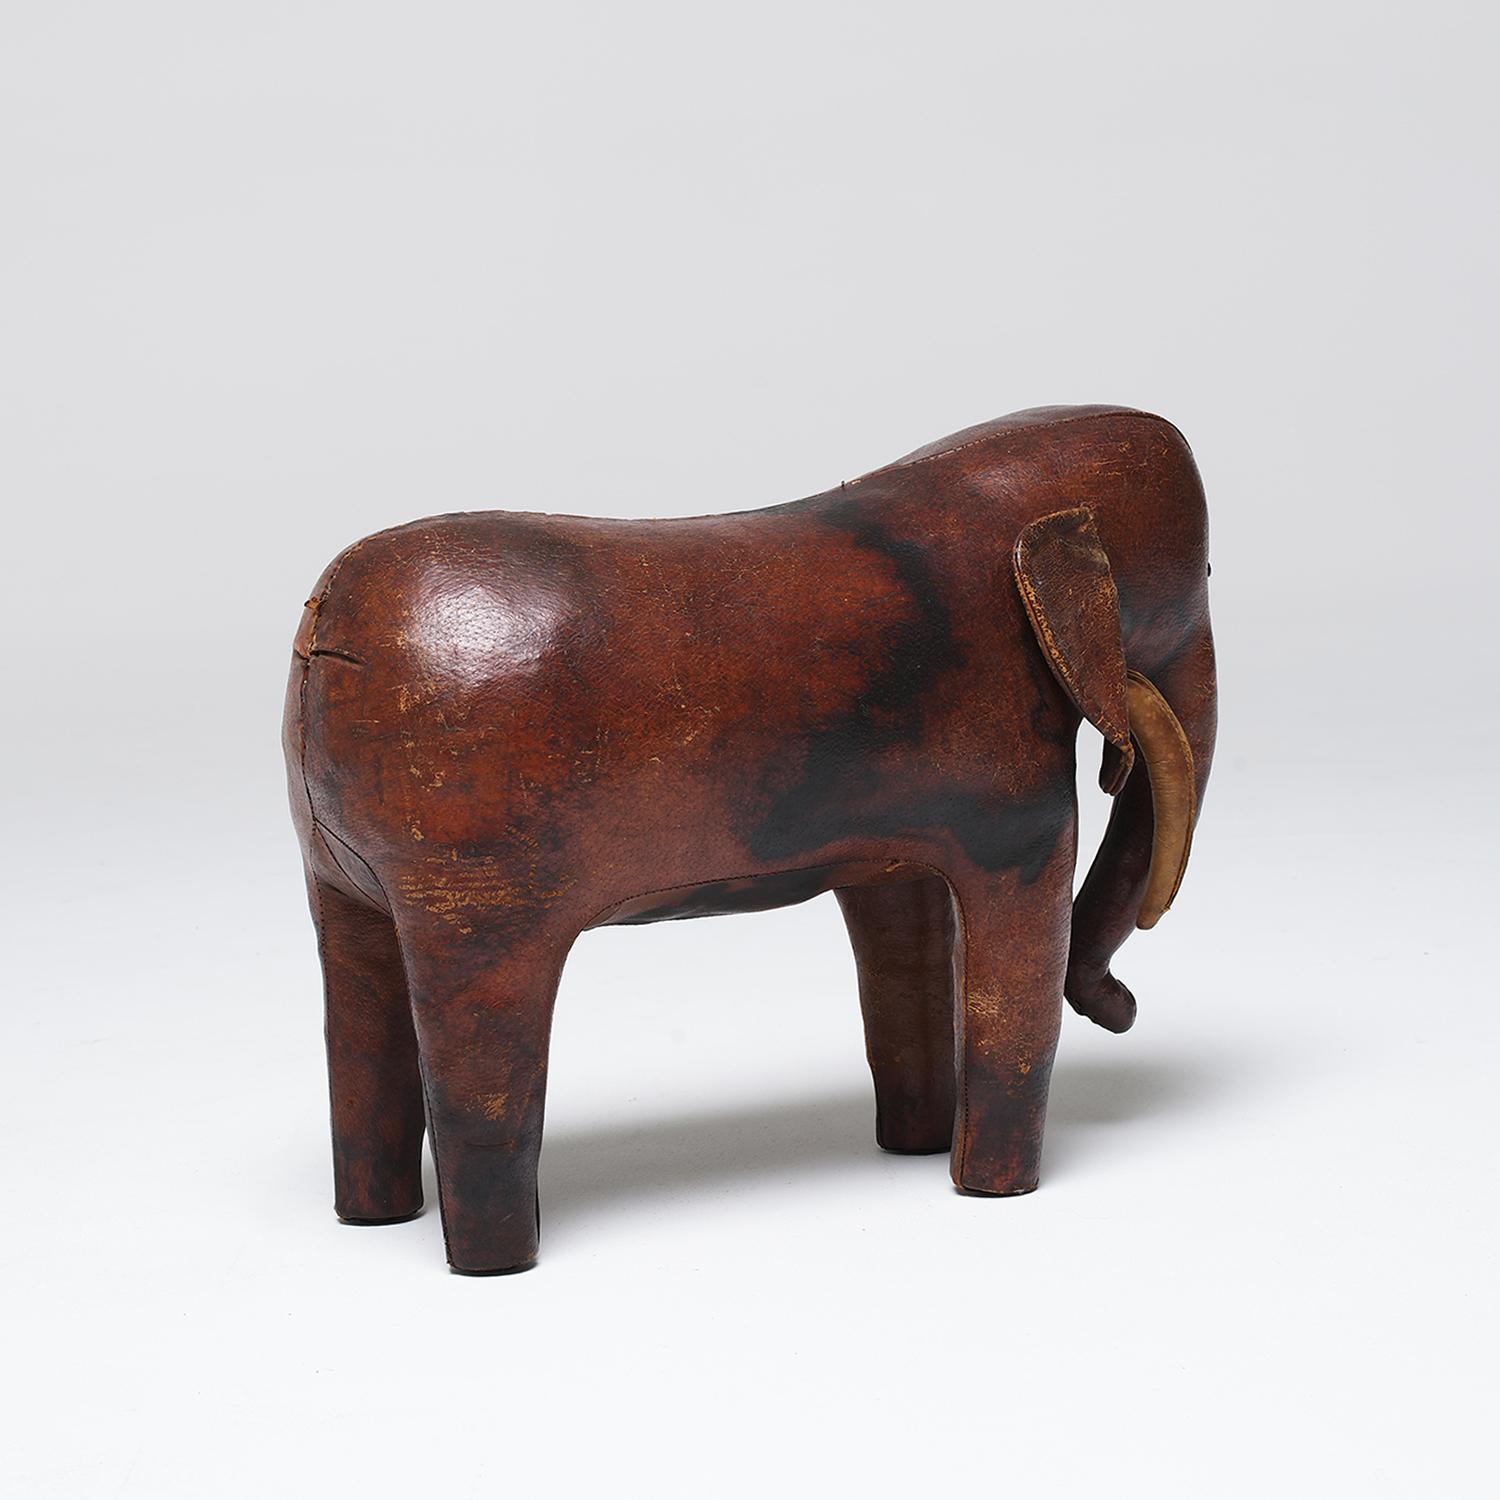 20th Century English Vintage Elephant Footstool by Dimitri Omersa For Sale 5